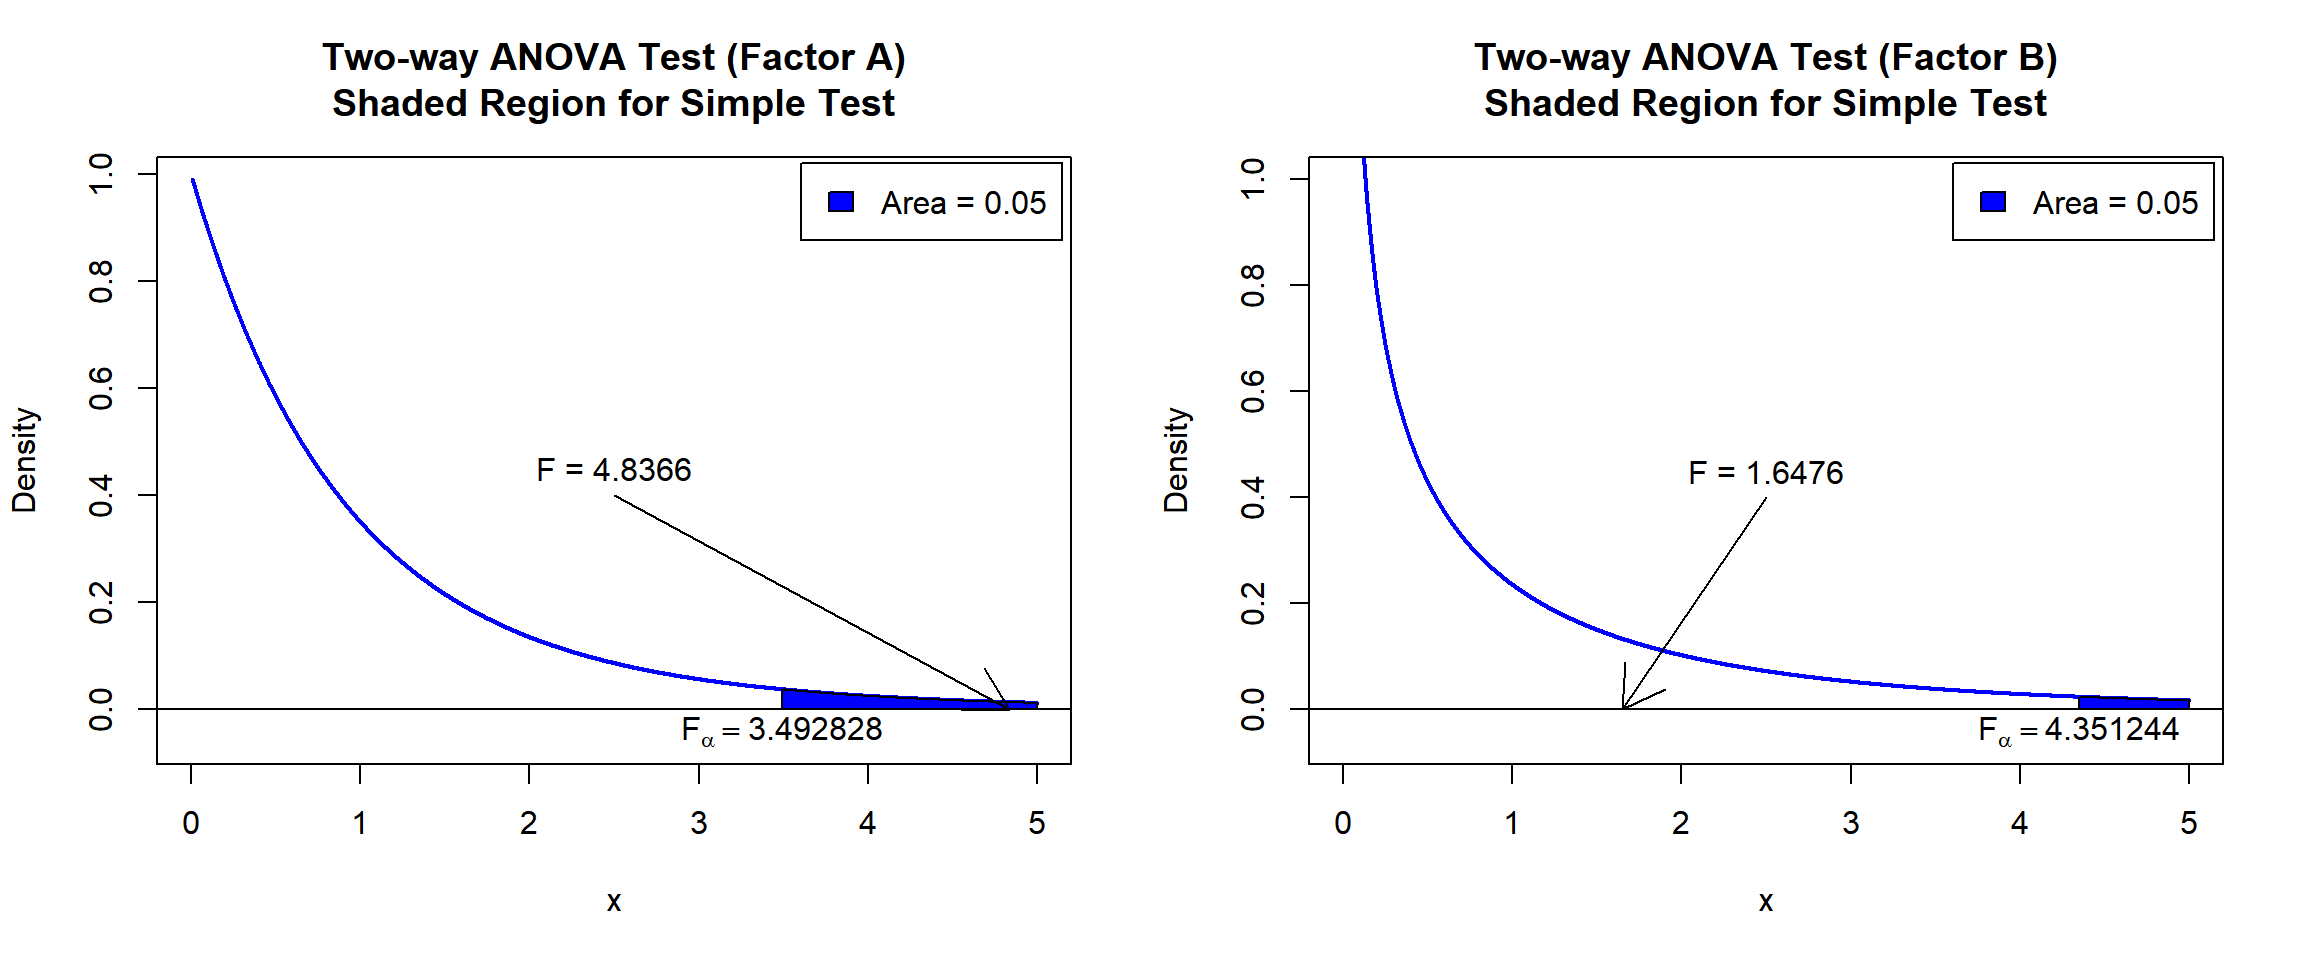 Two-way ANOVA Test Shaded Region for Simple Test in R